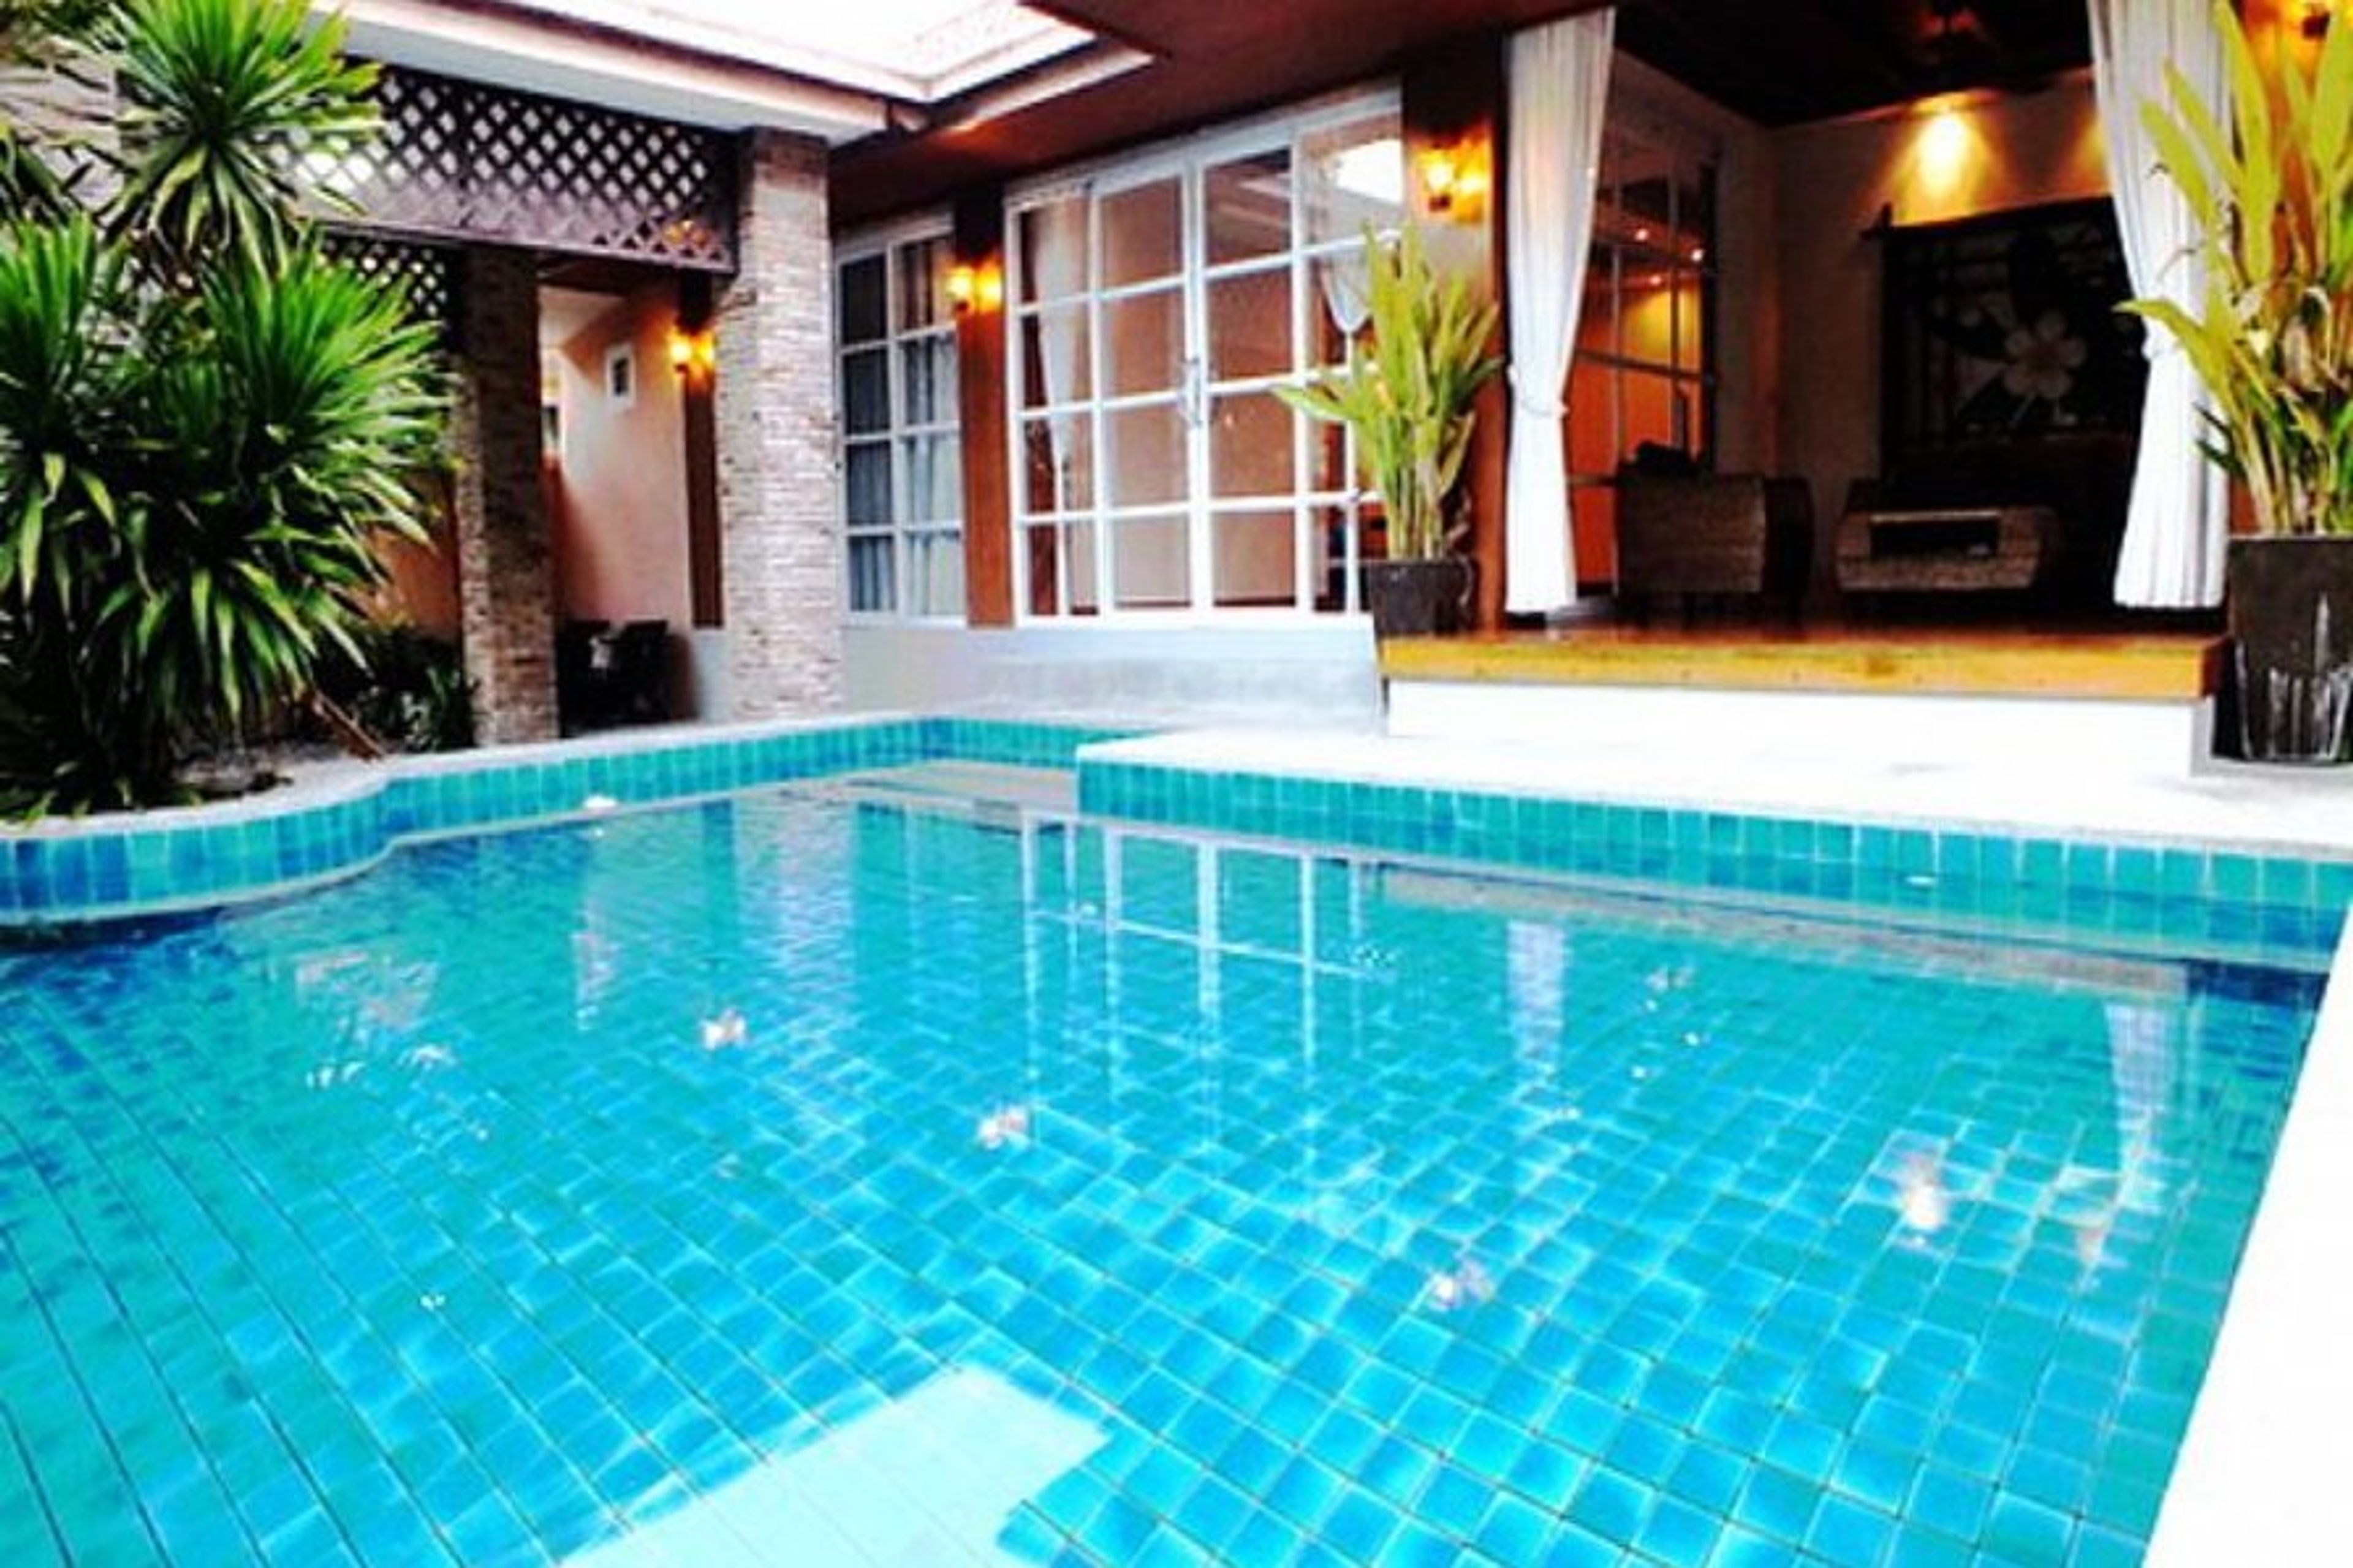 4 Bedroom Villa with Private Pool & Great Waterfall Feature